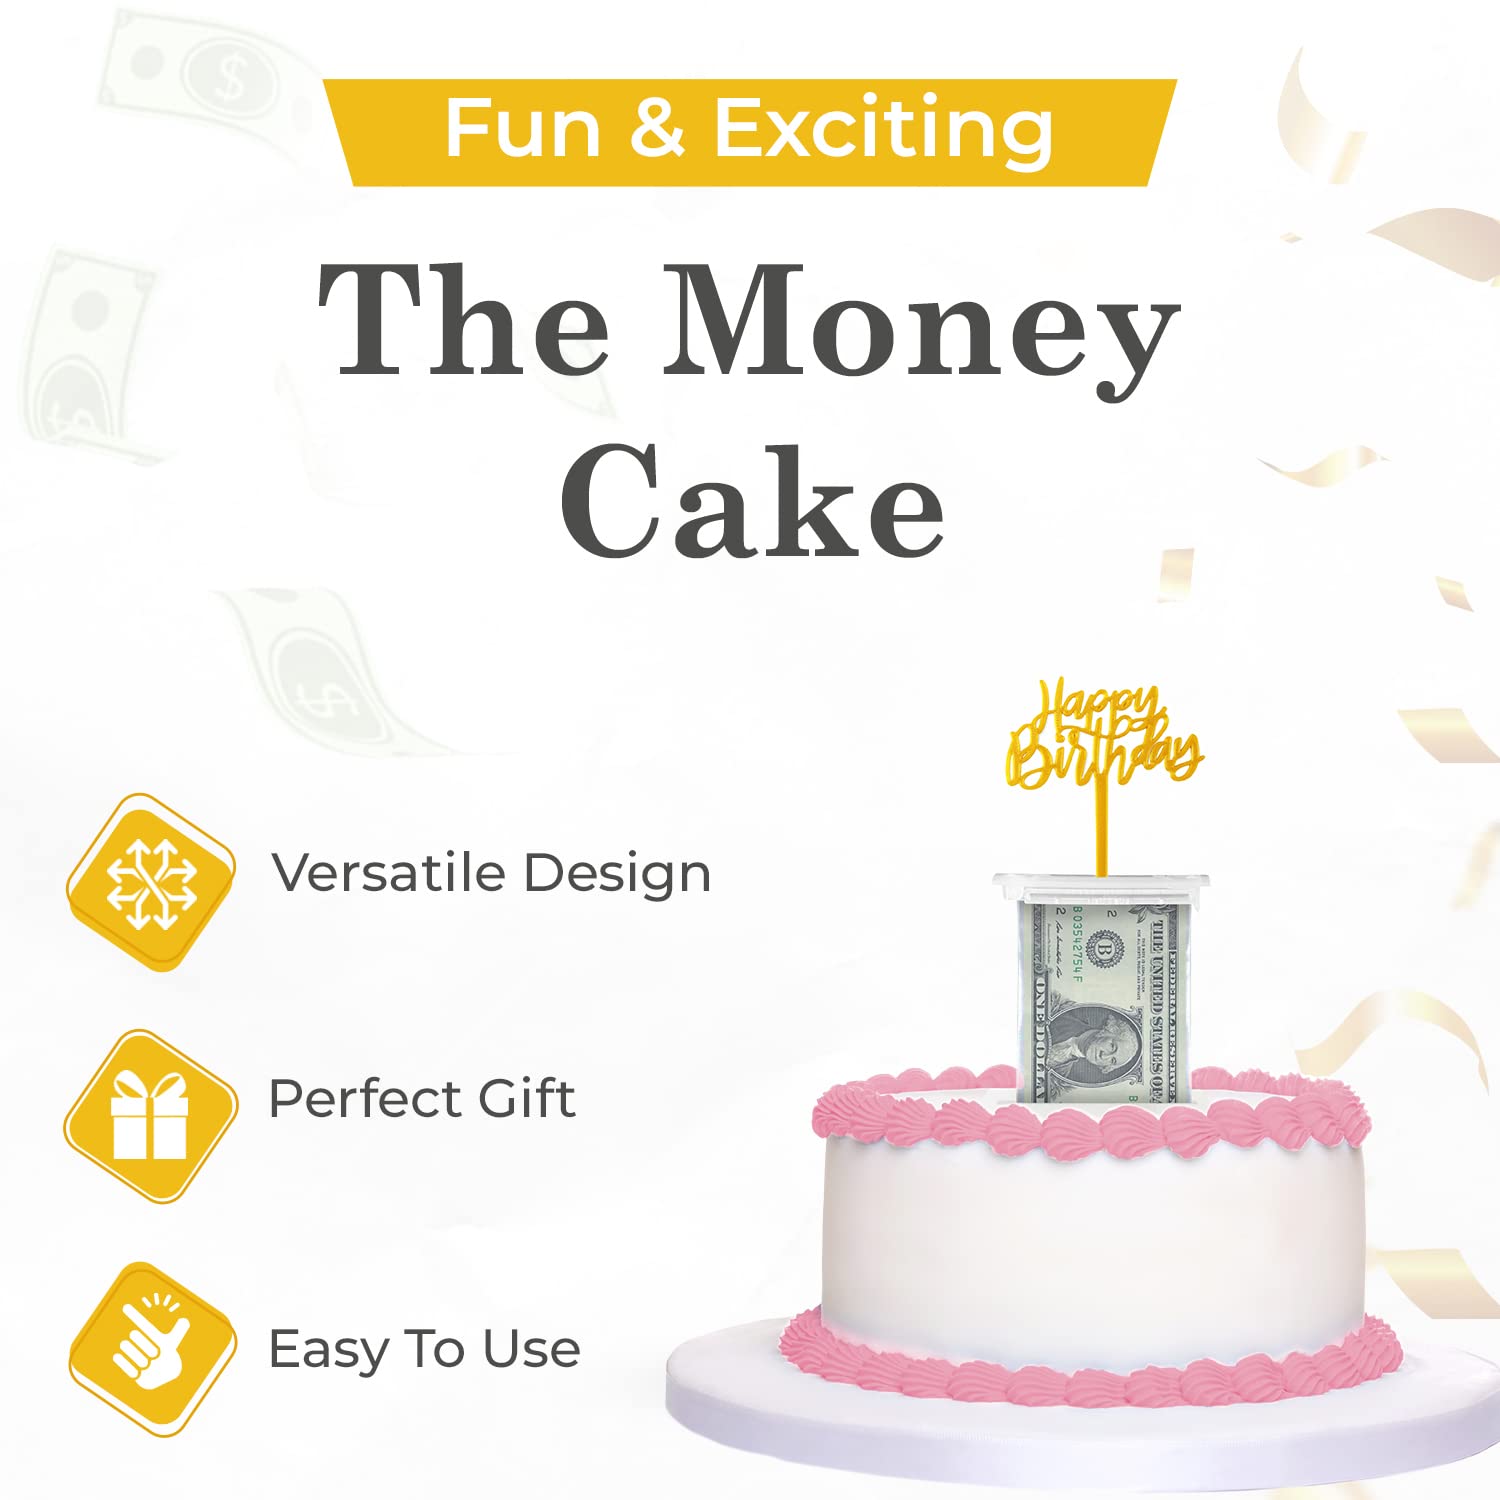 The Money Cake - Money Cake Pull Out Kit Includes 1 Money Box 1 Plastic Roll 50 Transparent Bag Connected Pocket, and Happy Birthday Cake Topper for Birthday Parties